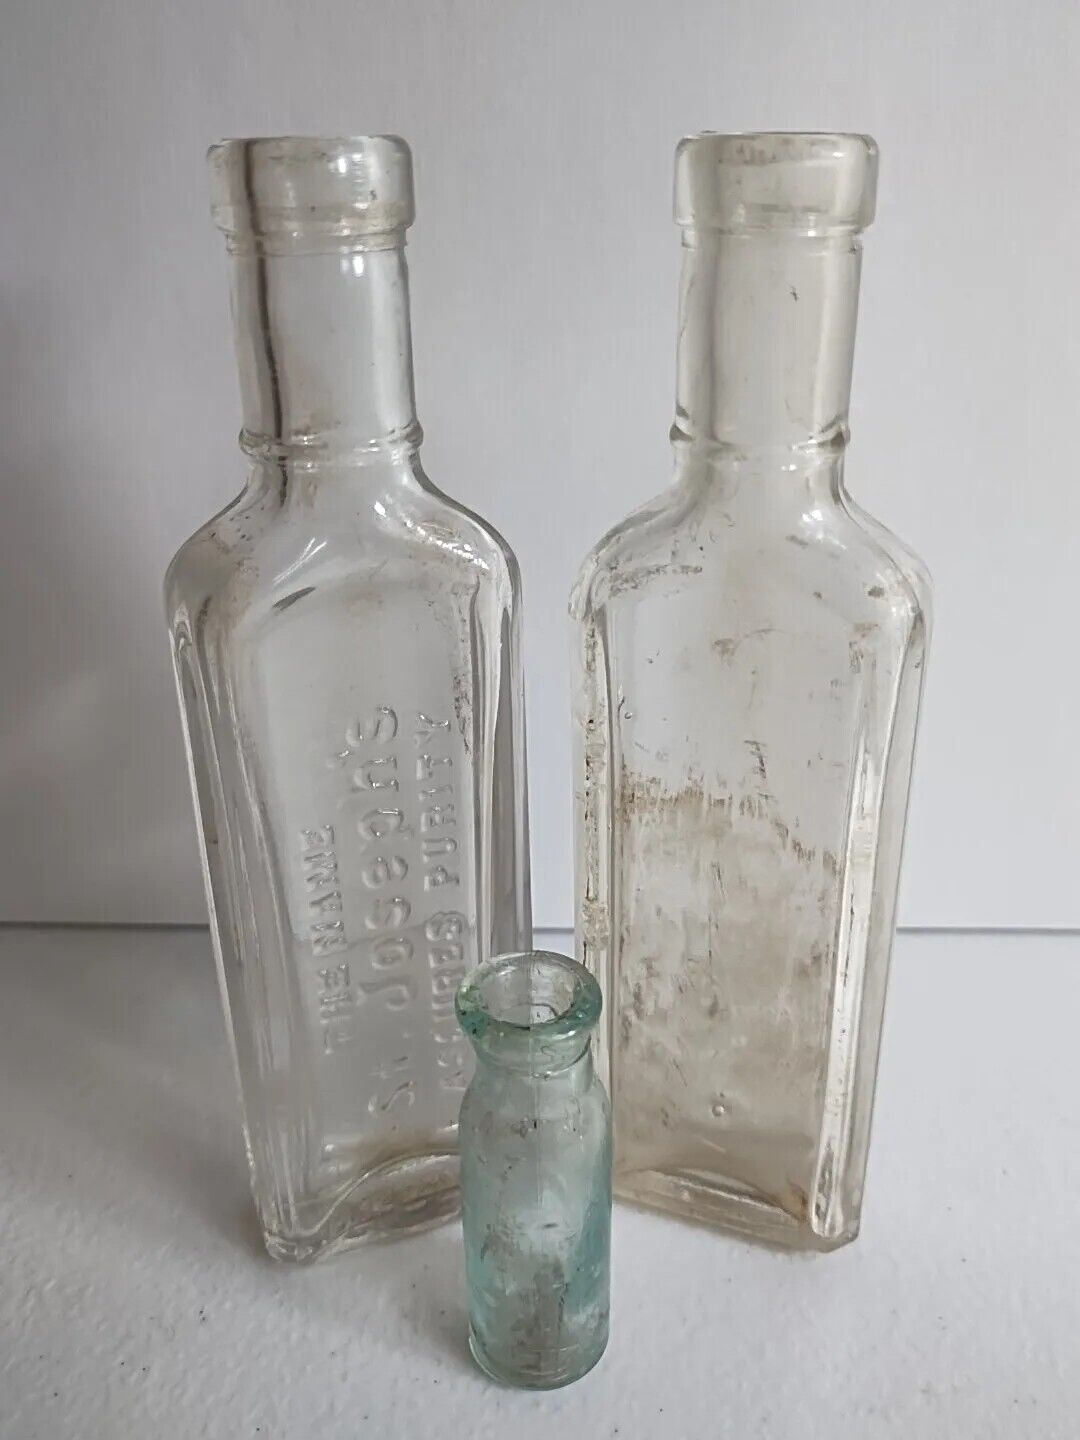 Antique Glass Bottles Medicine and Apothecary Inkwell Lot of 3 Pcs Vintage Clear